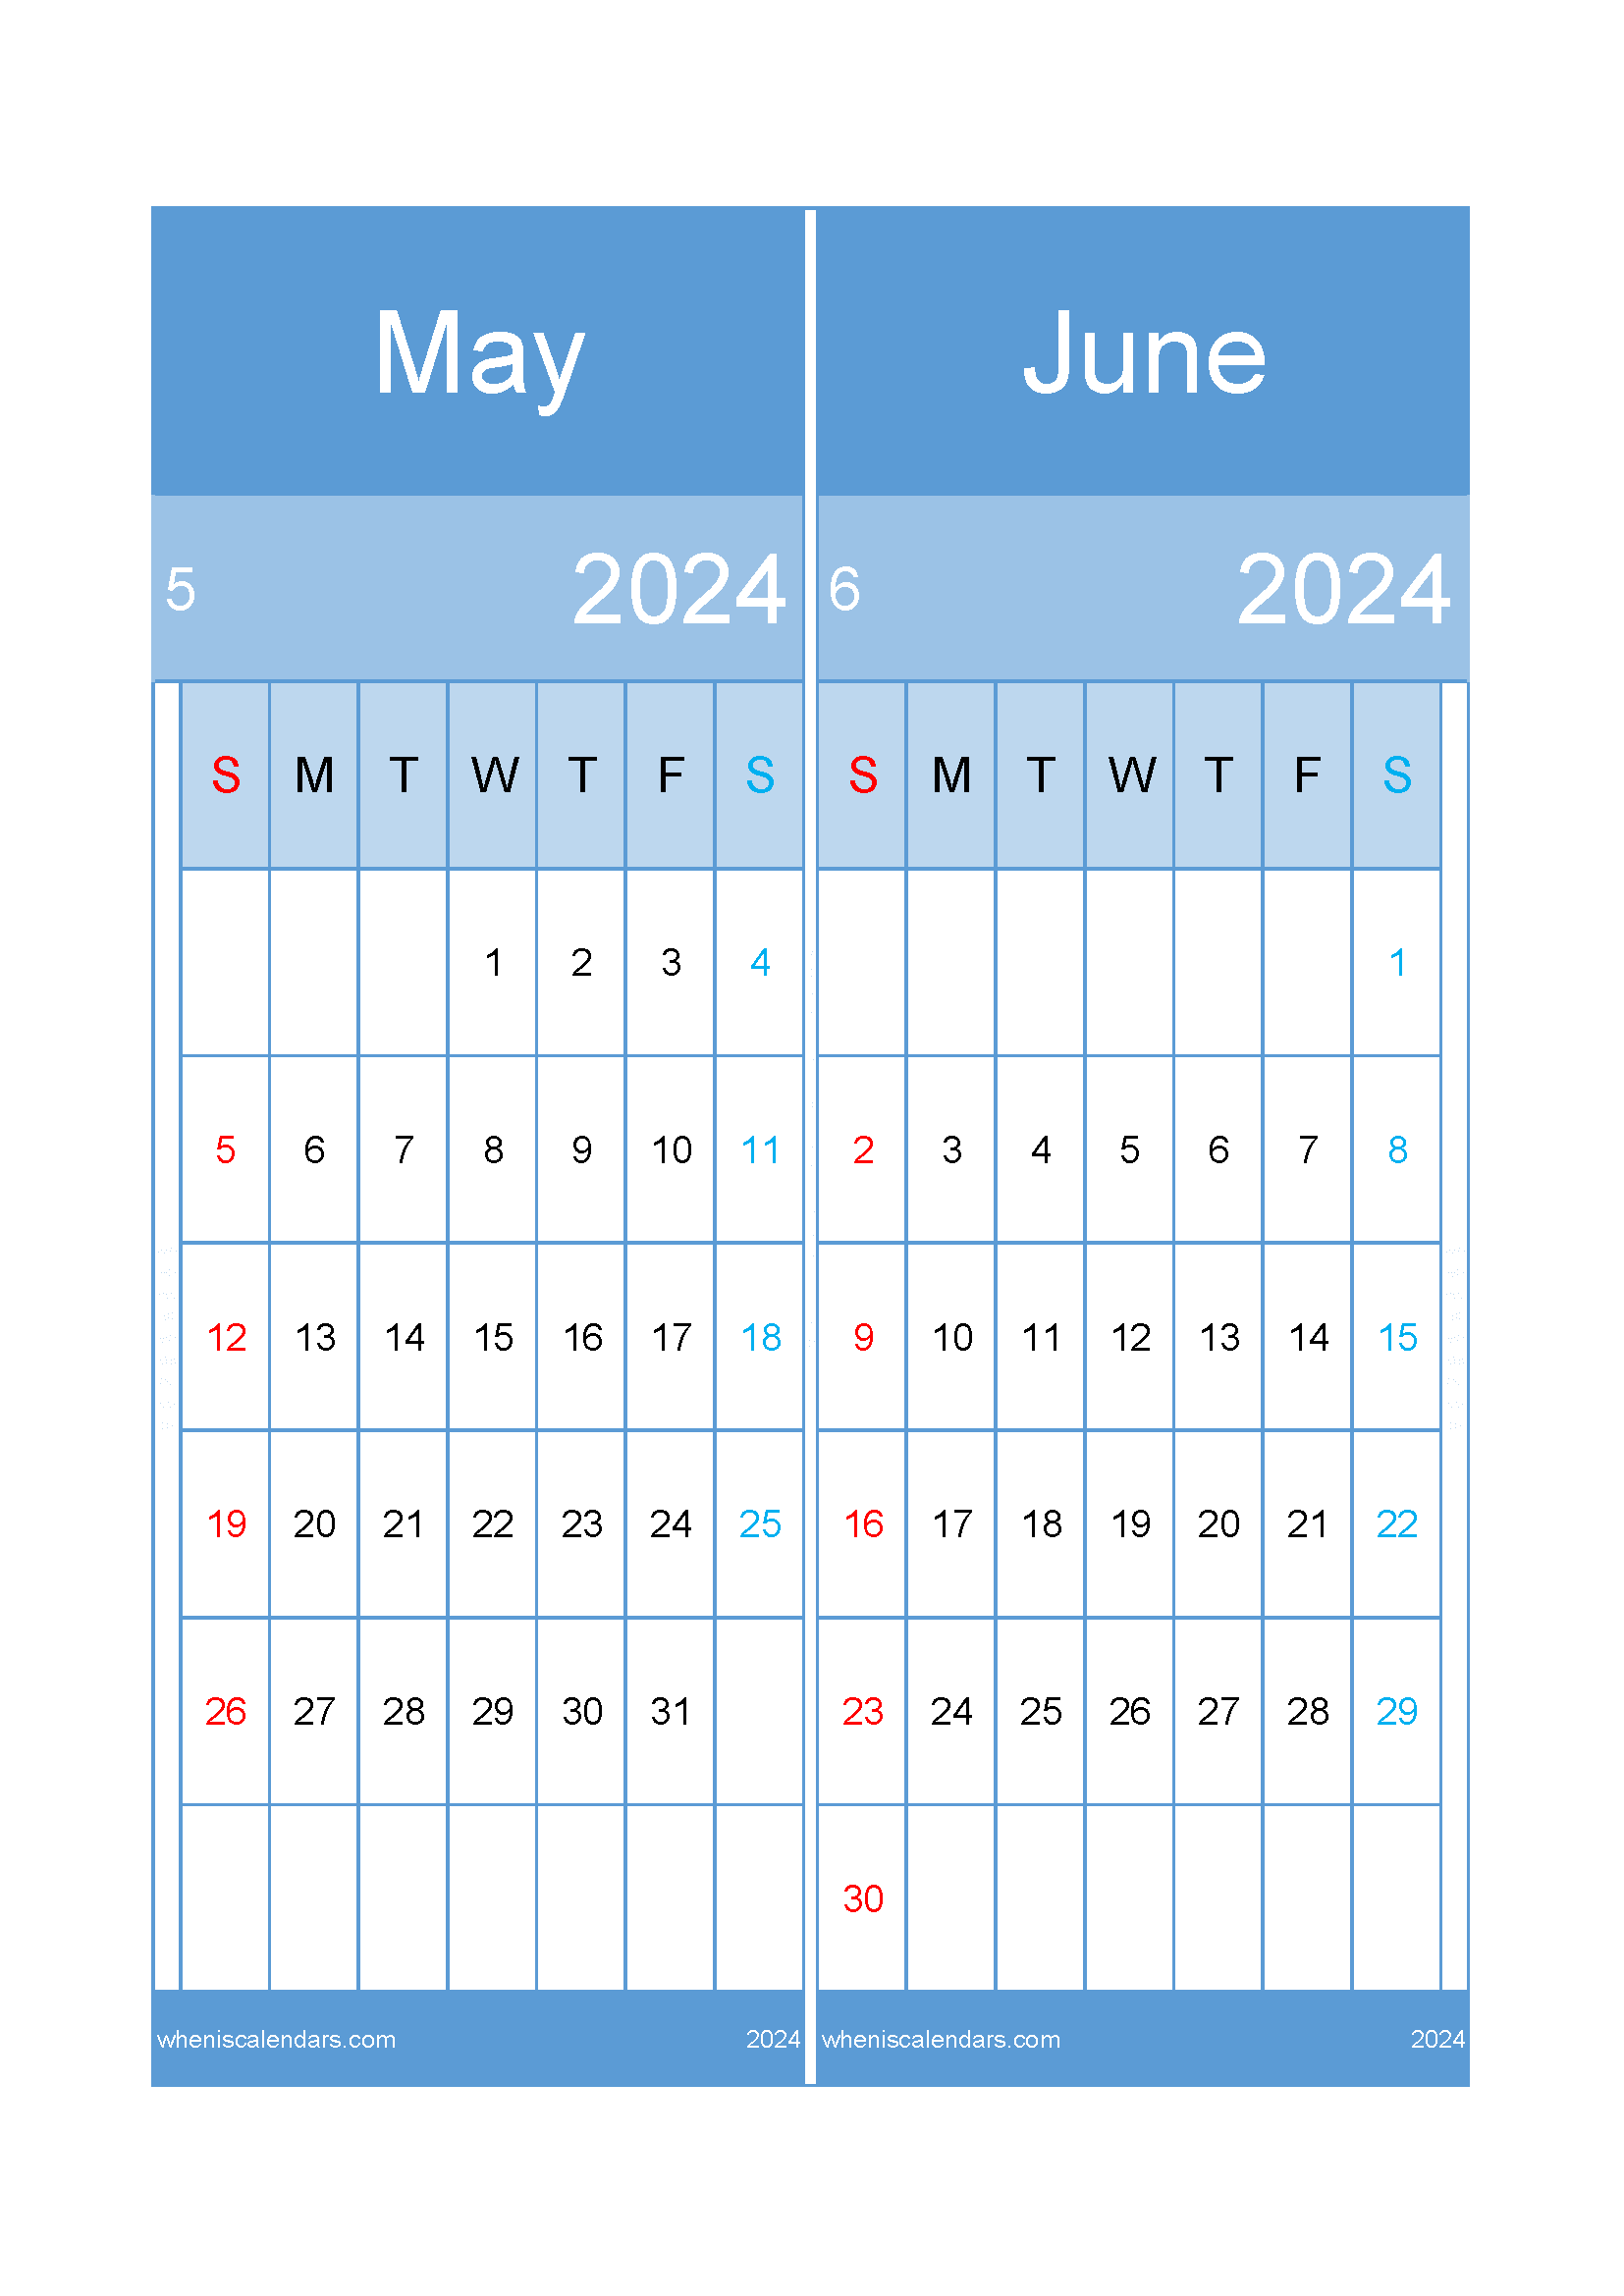 Download calendar May and June 2024 A4 MJ242021